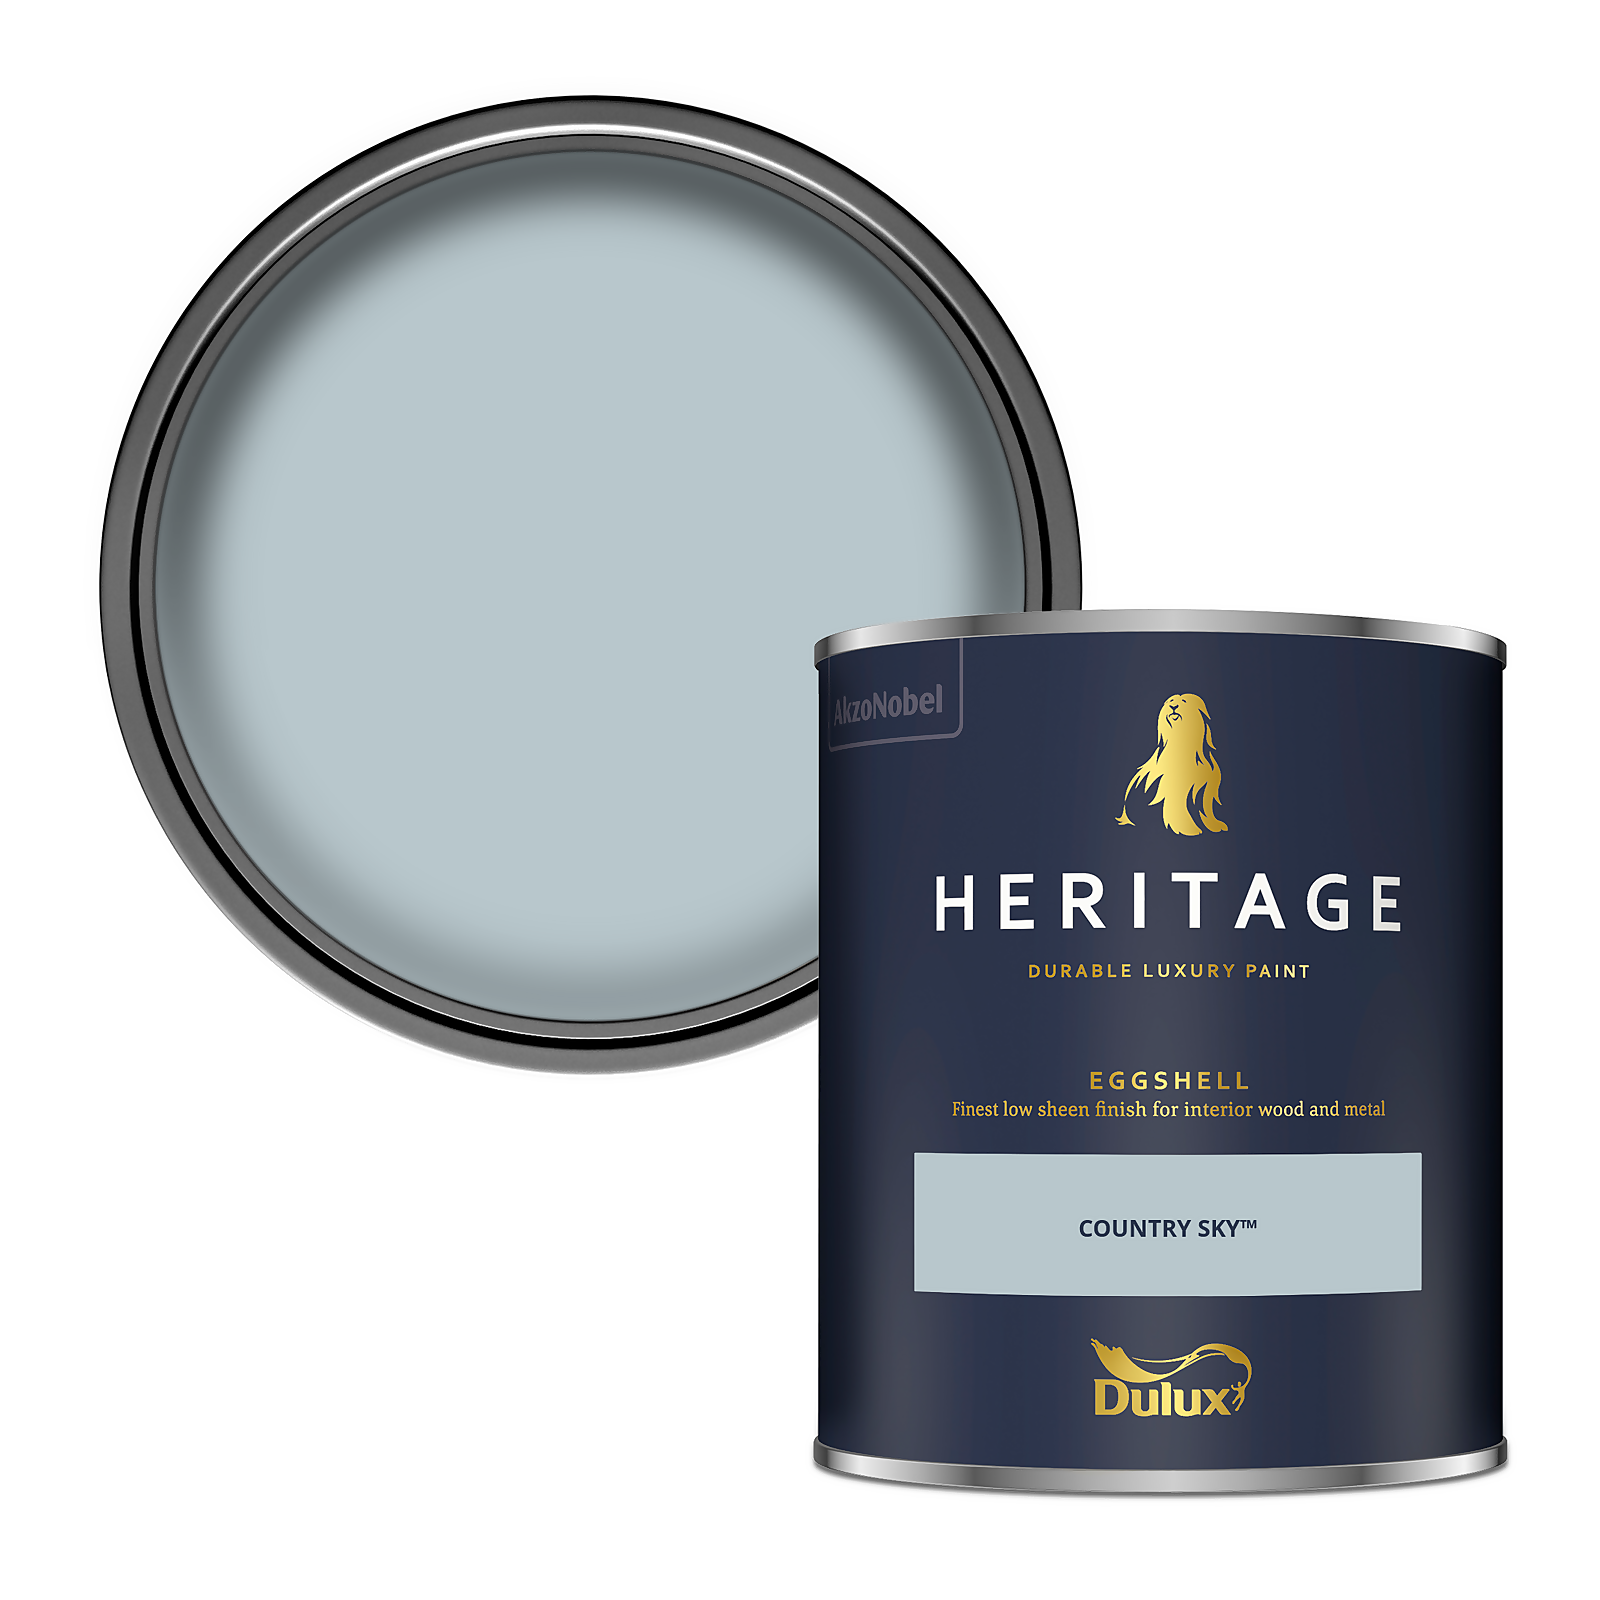 Dulux Heritage Eggshell Paint - Country Sky - 750ml